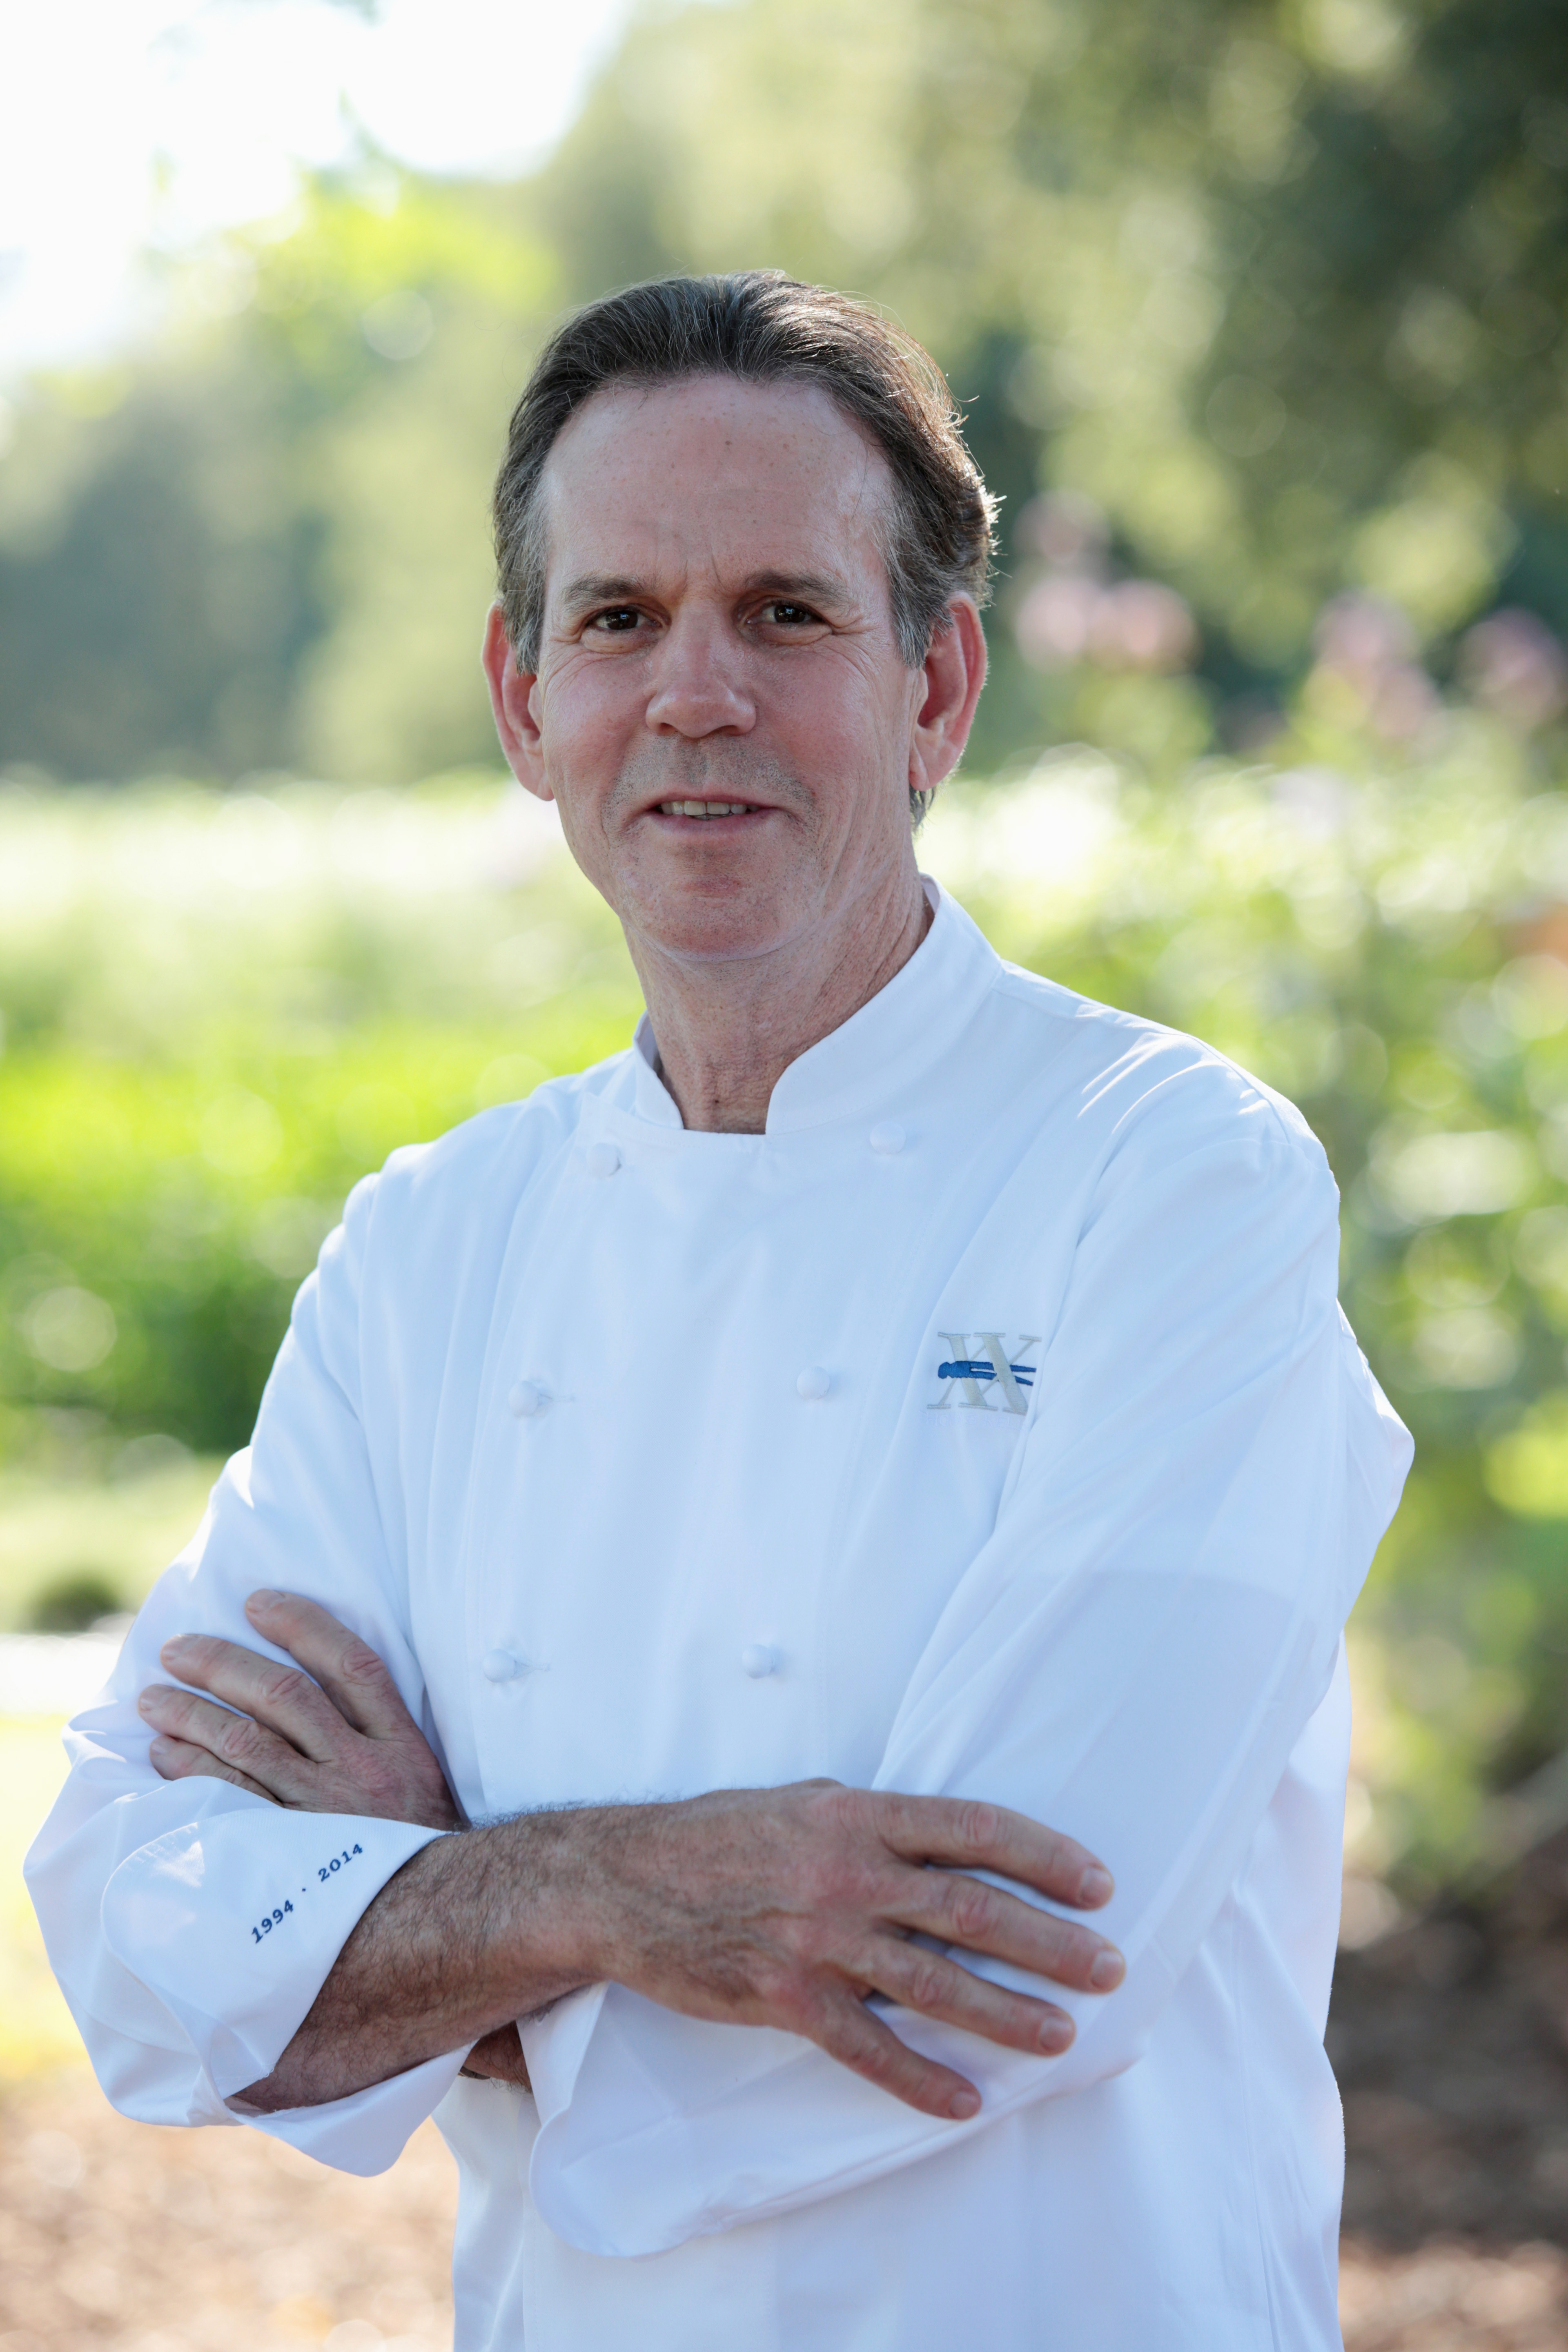 Chef Thomas Keller arrives at The French Laundry’s 20th Anniversary Celebration, Saturday, July 5, 2014, Yountville, CA.